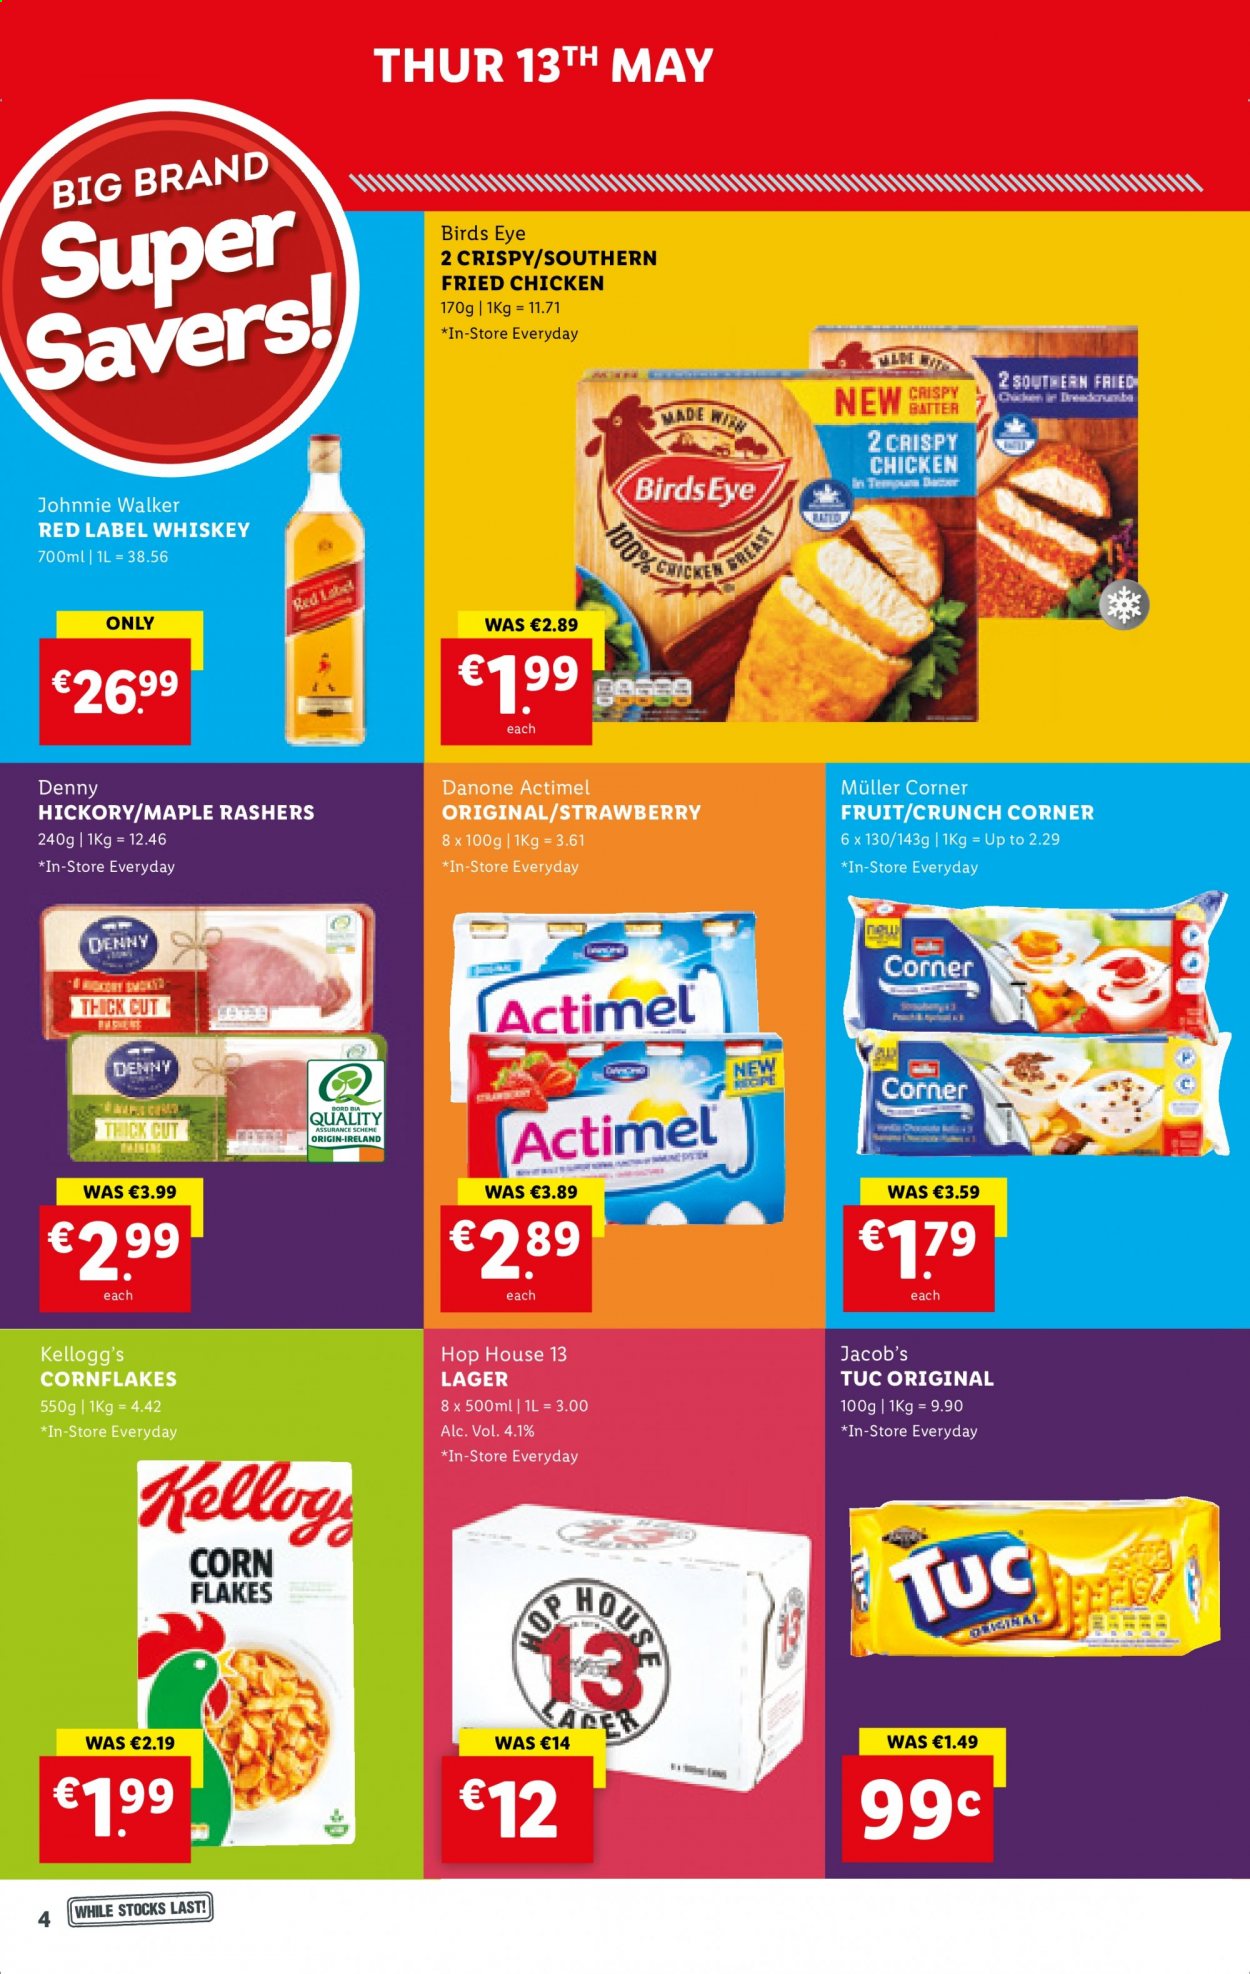 thumbnail - Lidl offer  - 13.05.2021 - 19.05.2021 - Sales products - fried chicken, Bird's Eye, Danone, Müller, Actimel, Kellogg's, corn flakes, whiskey, Johnnie Walker, whisky, beer, Lager. Page 4.